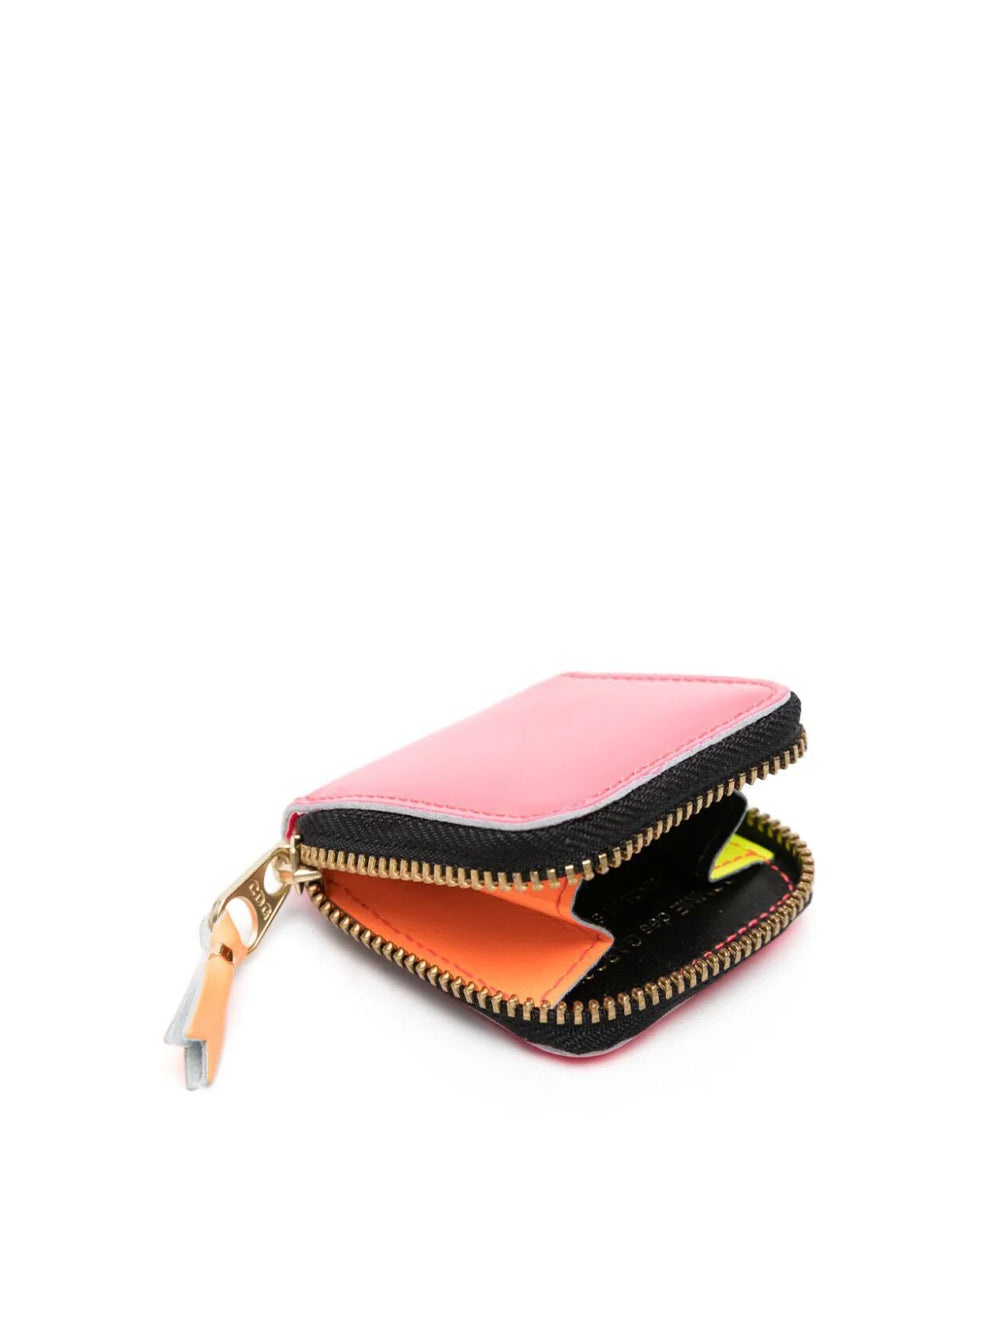 Mini Leather Coin Purse With Zip Fluo Pink - 3